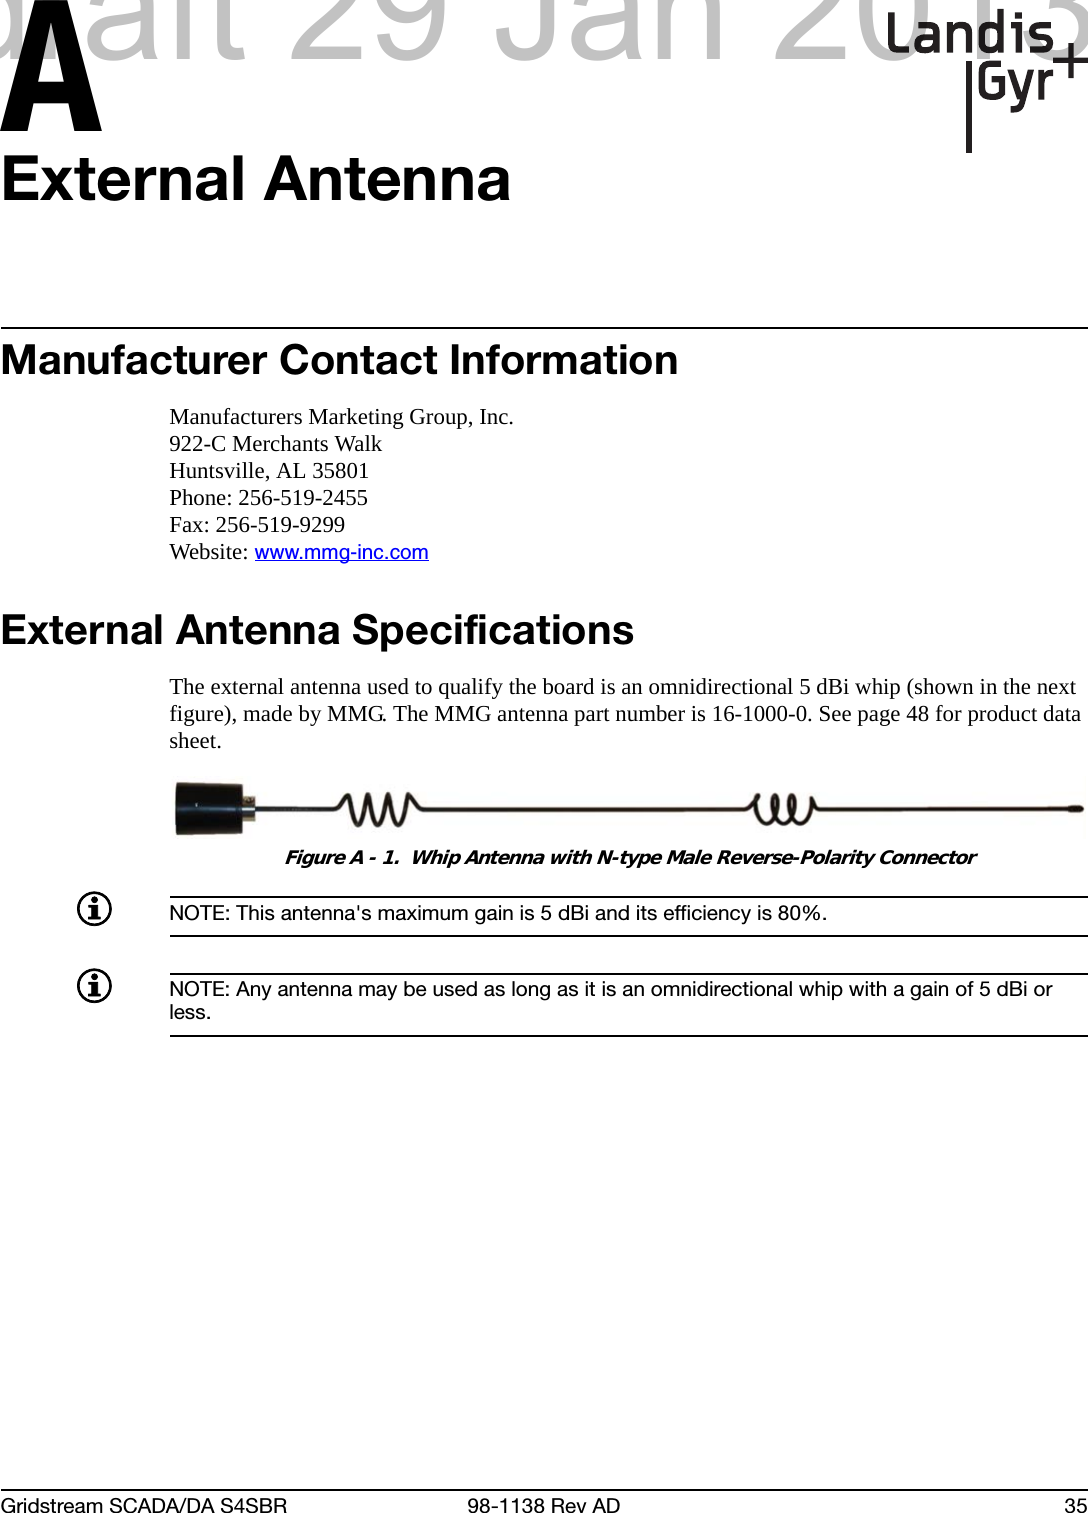 AGridstream SCADA/DA S4SBR 98-1138 Rev AD 35External AntennaManufacturer Contact InformationManufacturers Marketing Group, Inc.922-C Merchants WalkHuntsville, AL 35801Phone: 256-519-2455Fax: 256-519-9299Website: www.mmg-inc.comExternal Antenna SpecificationsThe external antenna used to qualify the board is an omnidirectional 5 dBi whip (shown in the next figure), made by MMG. The MMG antenna part number is 16-1000-0. See page 48 for product data sheet.Figure A - 1.  Whip Antenna with N-type Male Reverse-Polarity ConnectorNOTE: This antenna&apos;s maximum gain is 5 dBi and its efficiency is 80%.NOTE: Any antenna may be used as long as it is an omnidirectional whip with a gain of 5 dBi or less.draft 29 Jan 2013